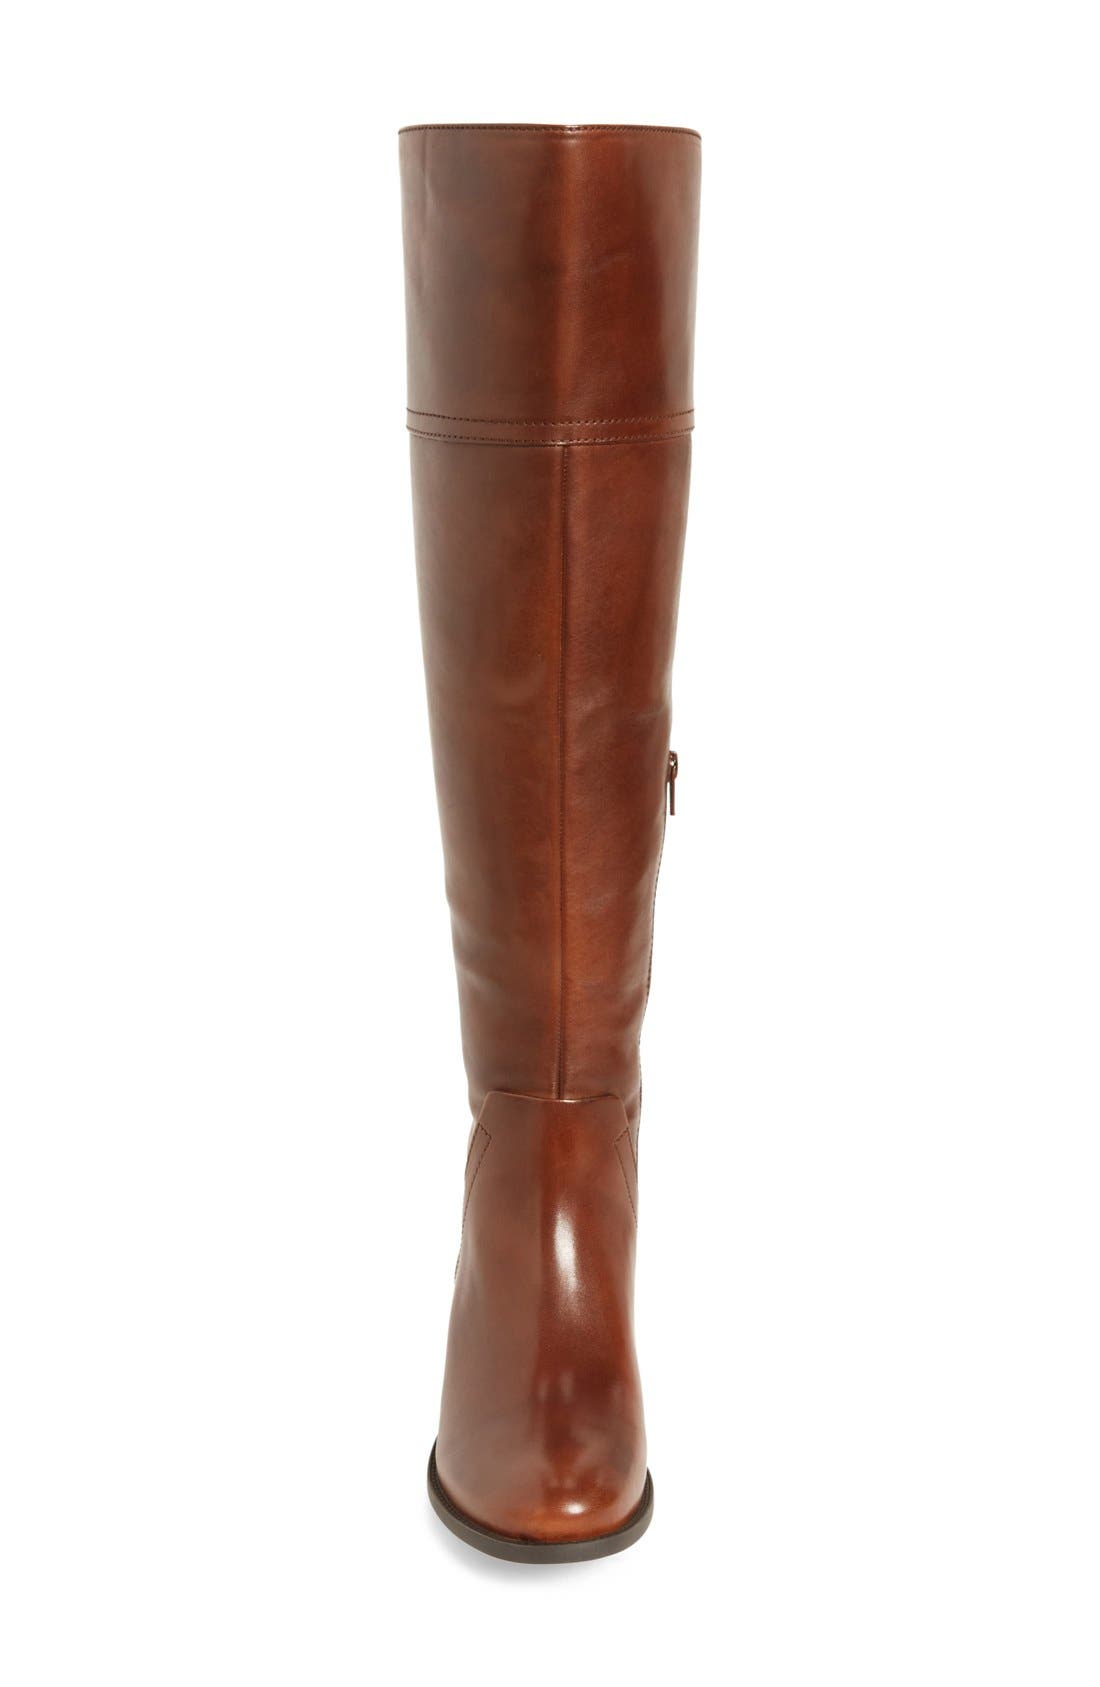 vince camuto bolina over the knee boot